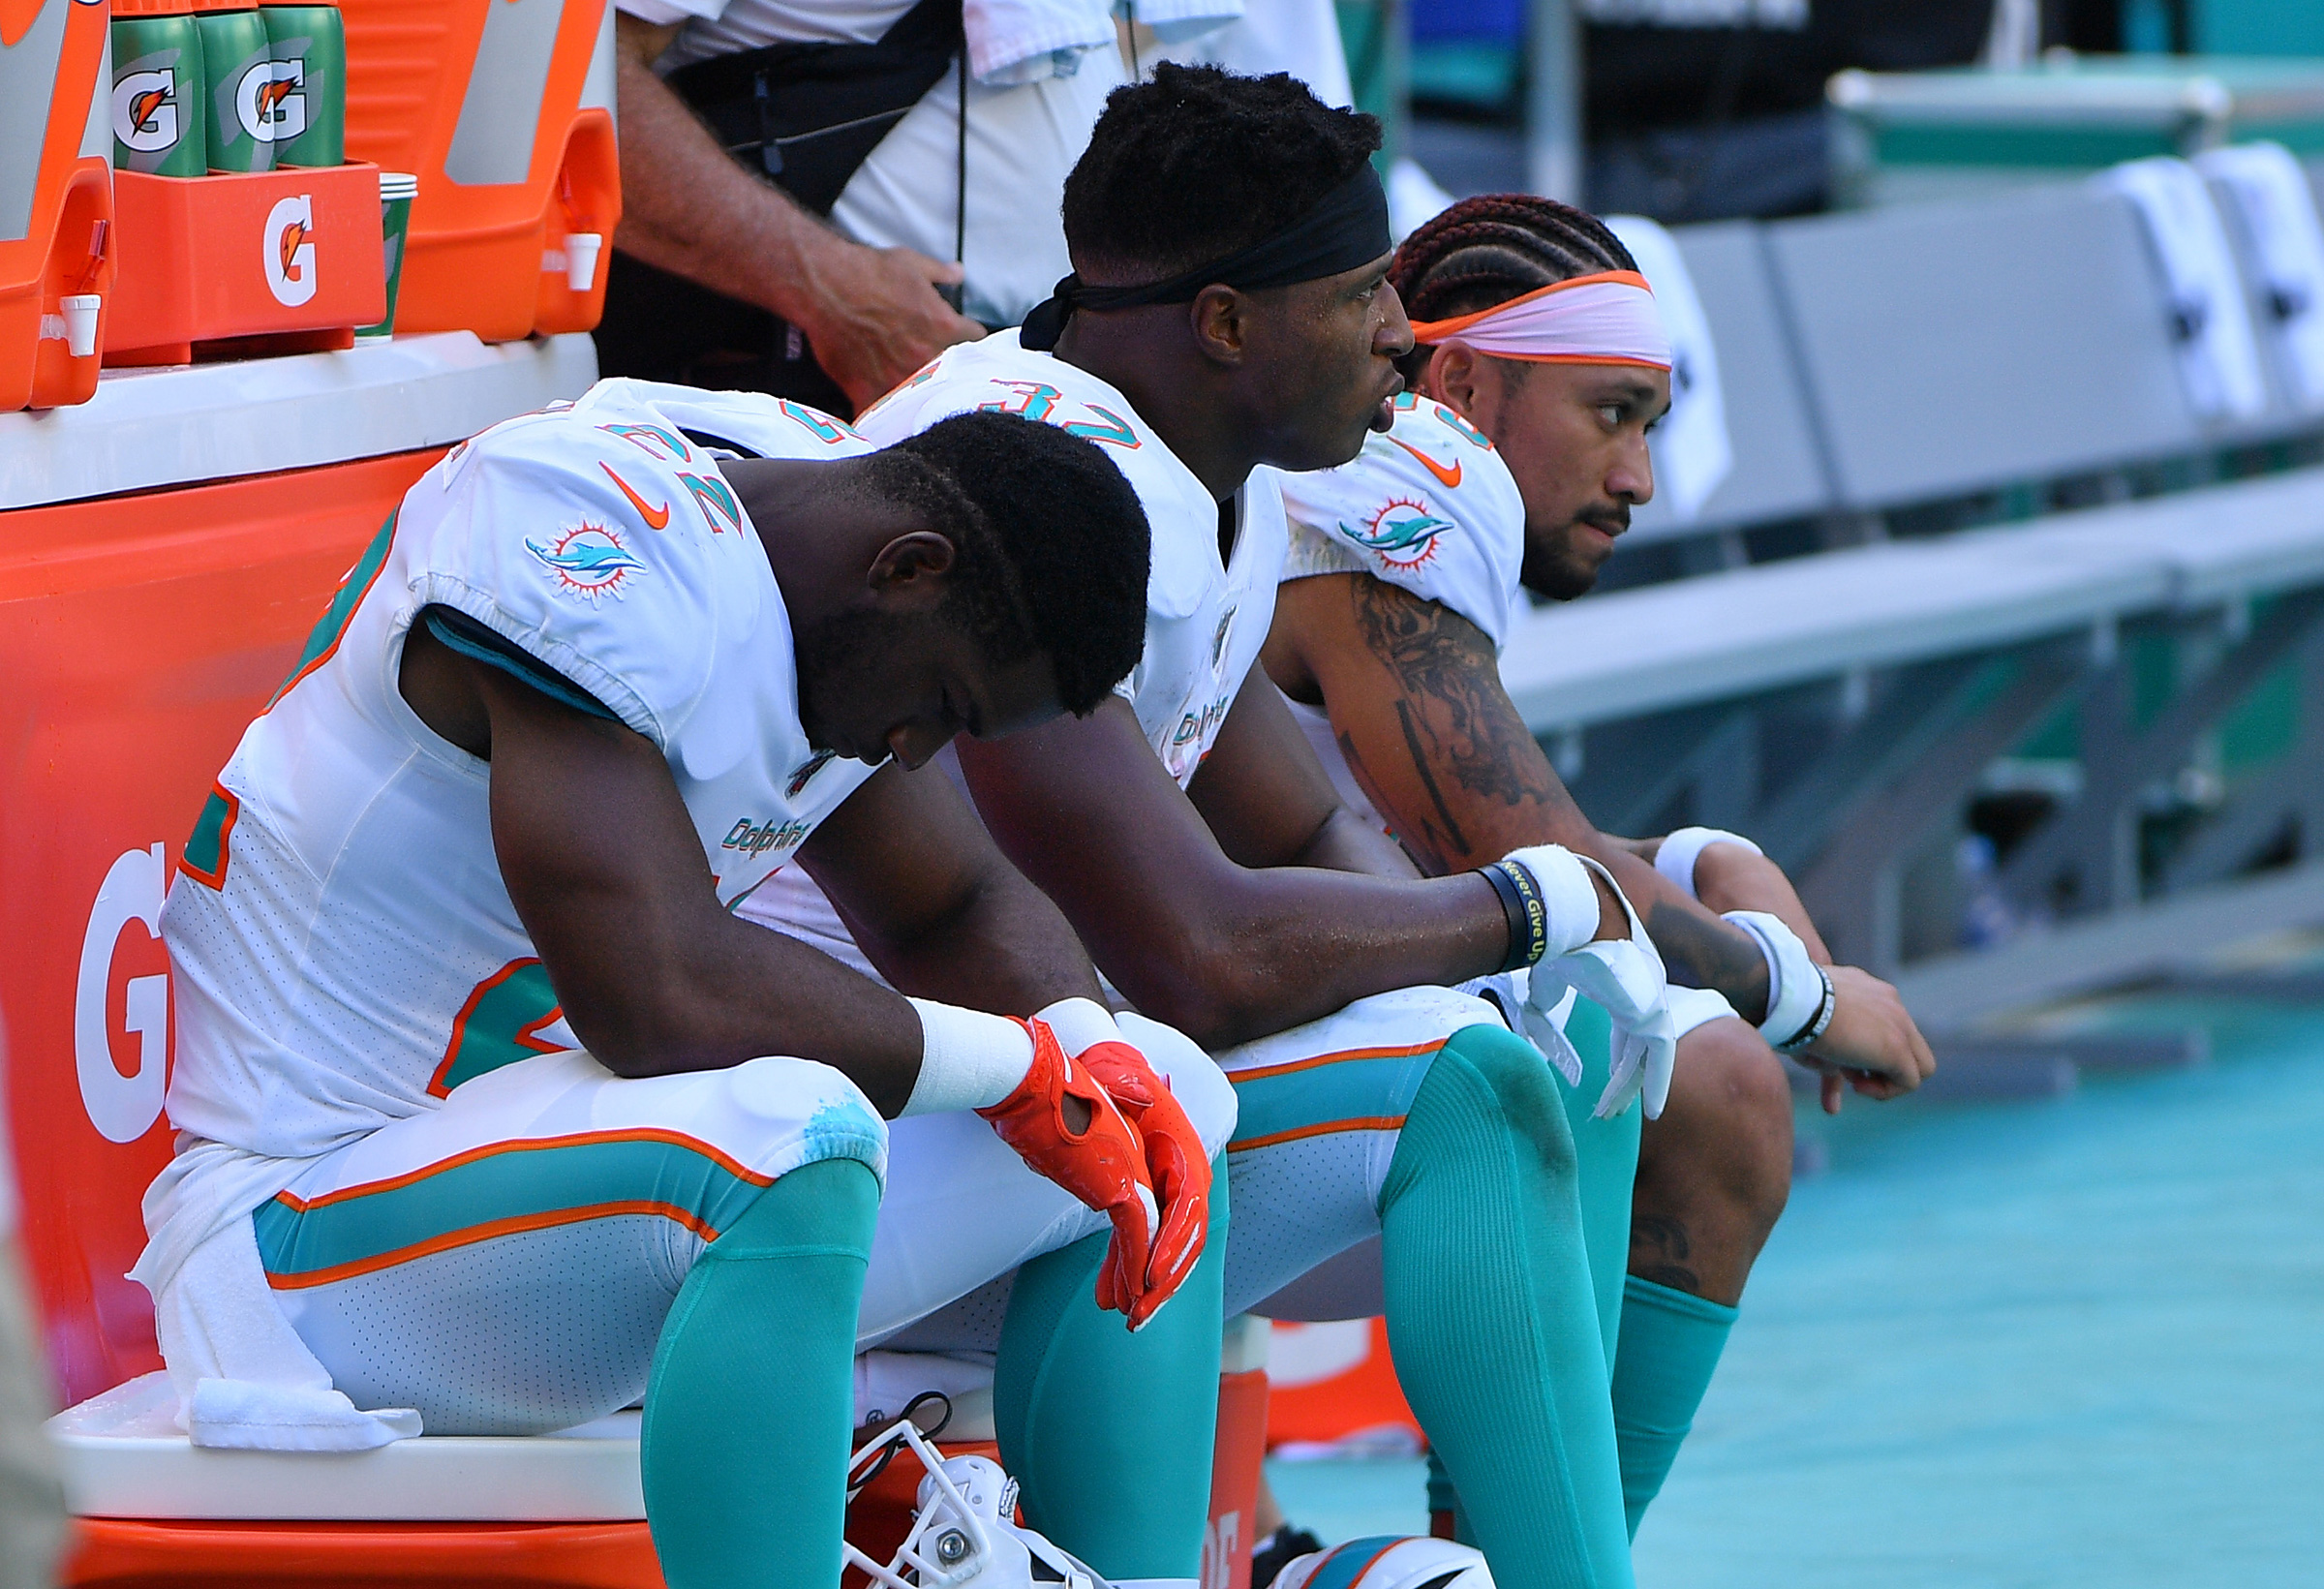 Miami players take in a 59-10 loss to Baltimore on Sept. 8 (Mark Brown—Getty Images)